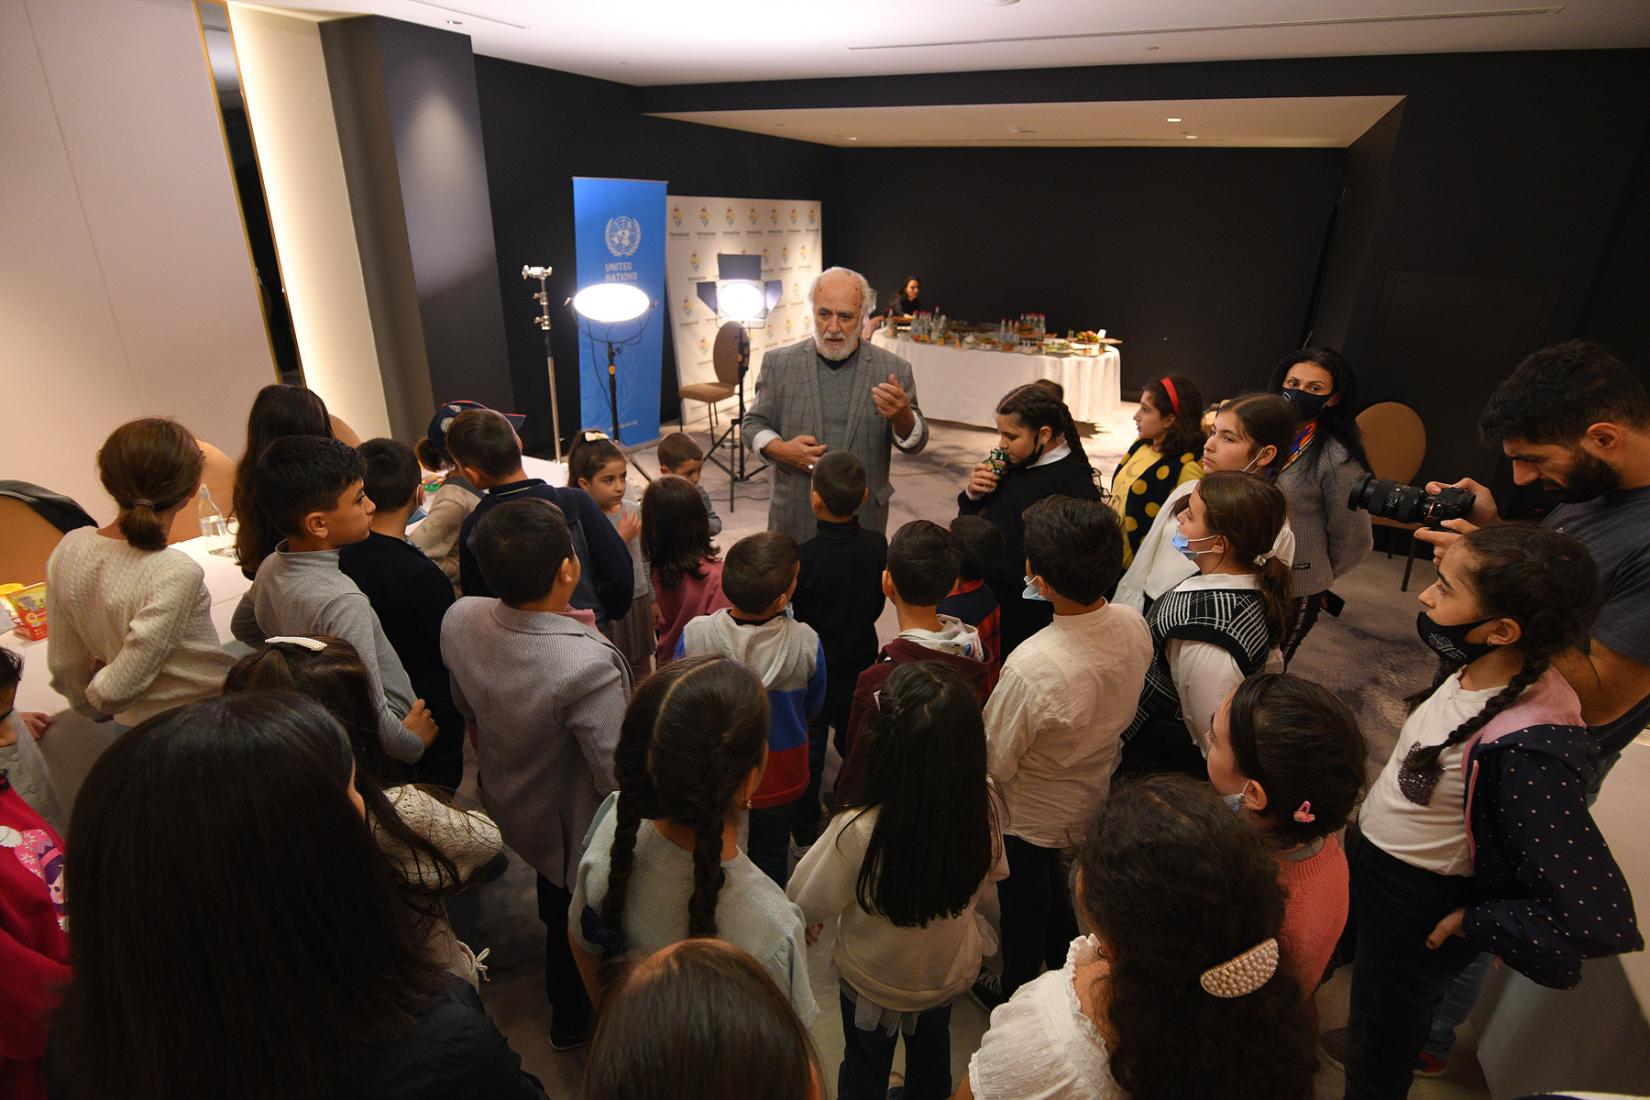 Kids surrounded Samvel Sevada who gives useful tips to them.